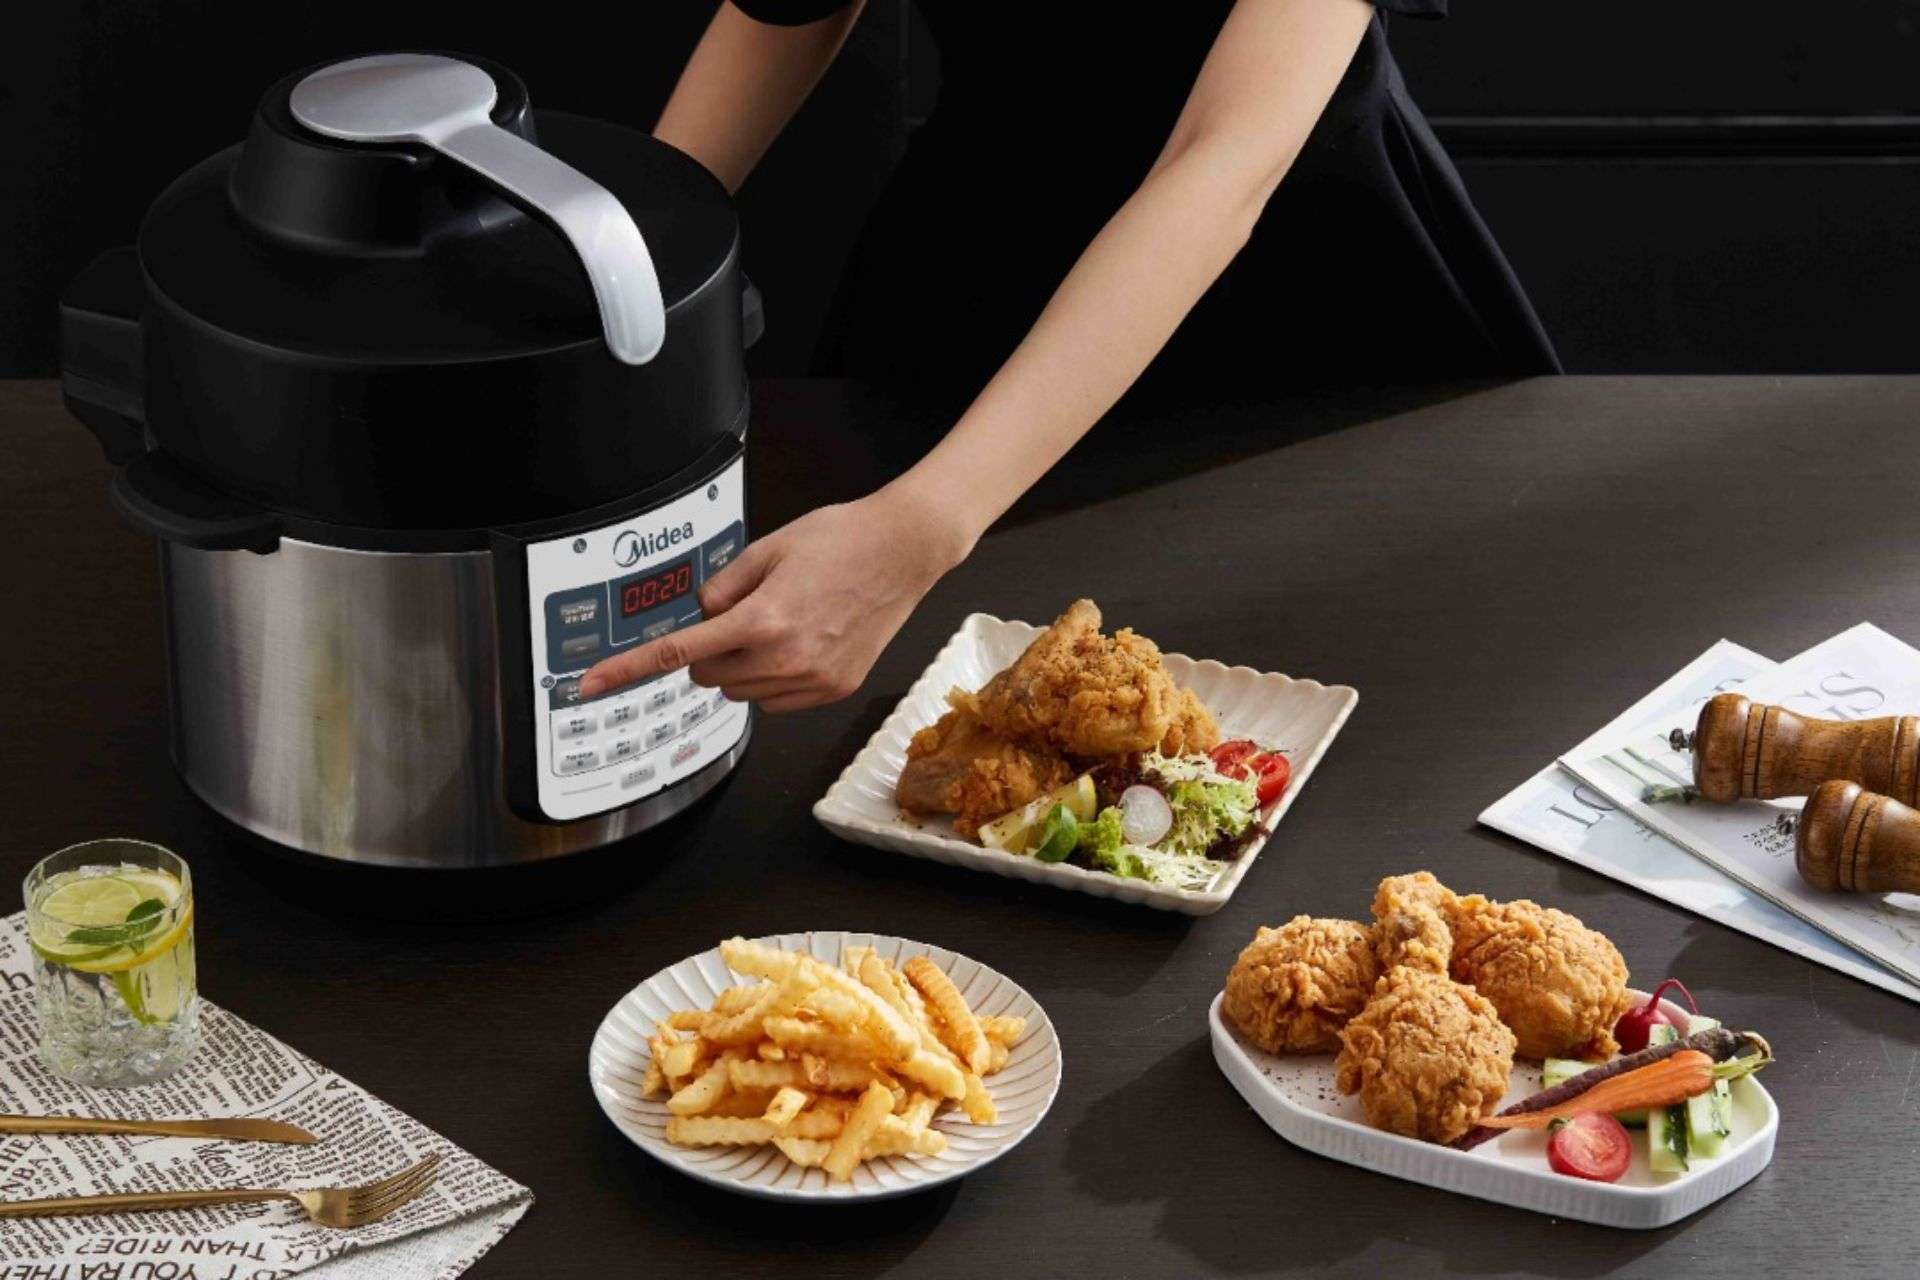 Dual Lid Multi Cooker, 1 lid for Air Fryer and 1 for Pressure